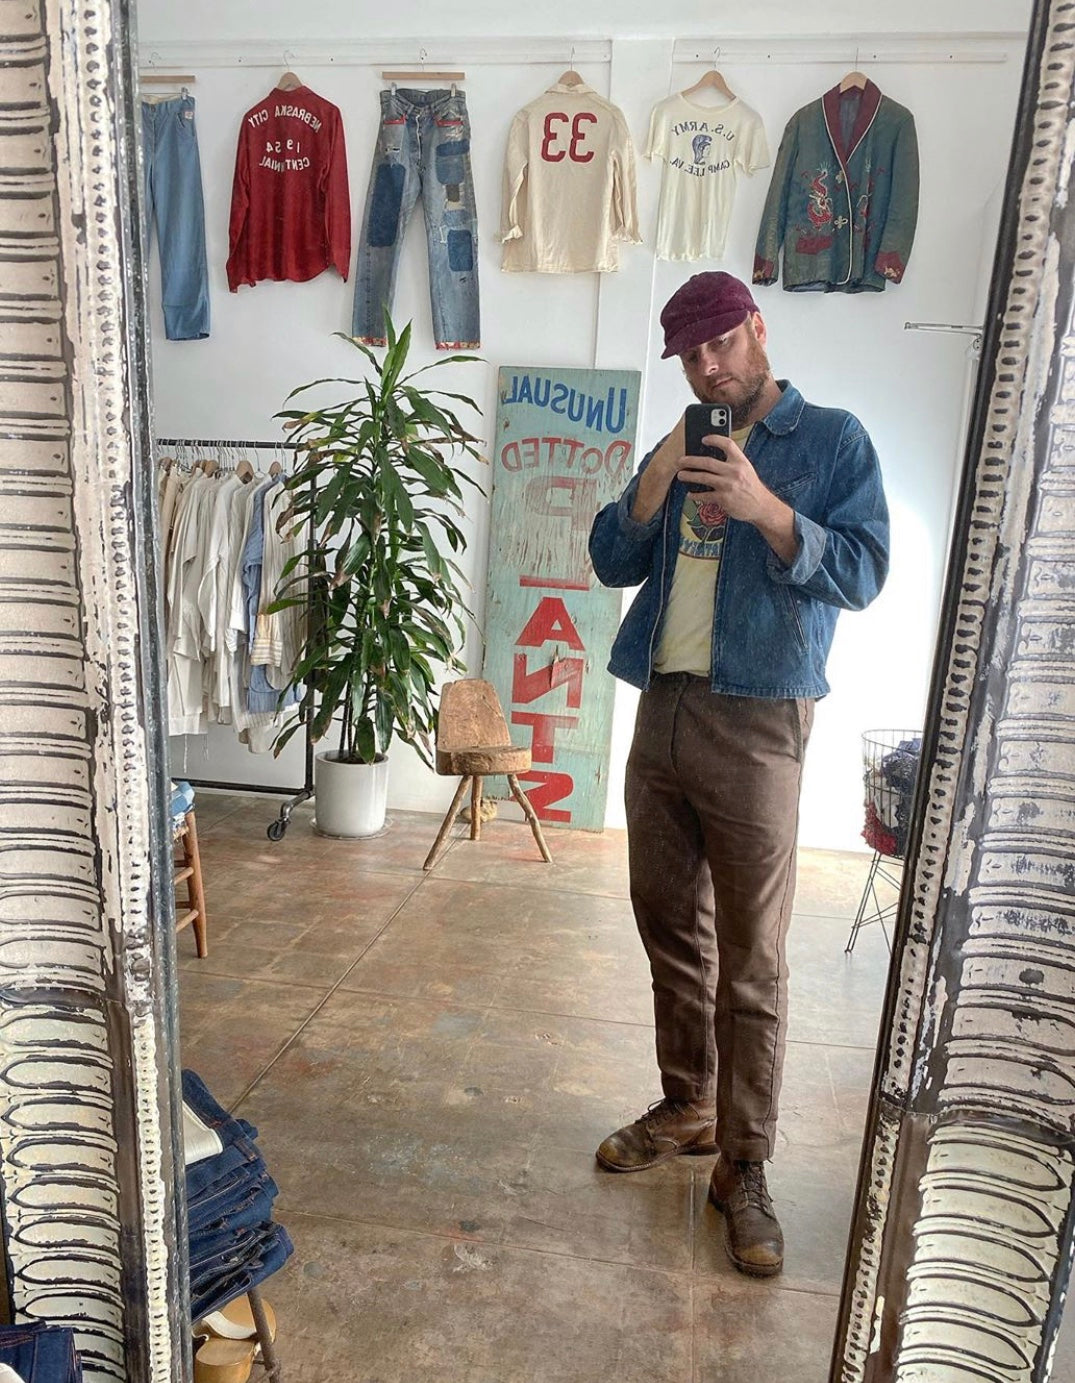 Cult Los Angeles Vintage Dealer Mothfood Offers a Window to the Past